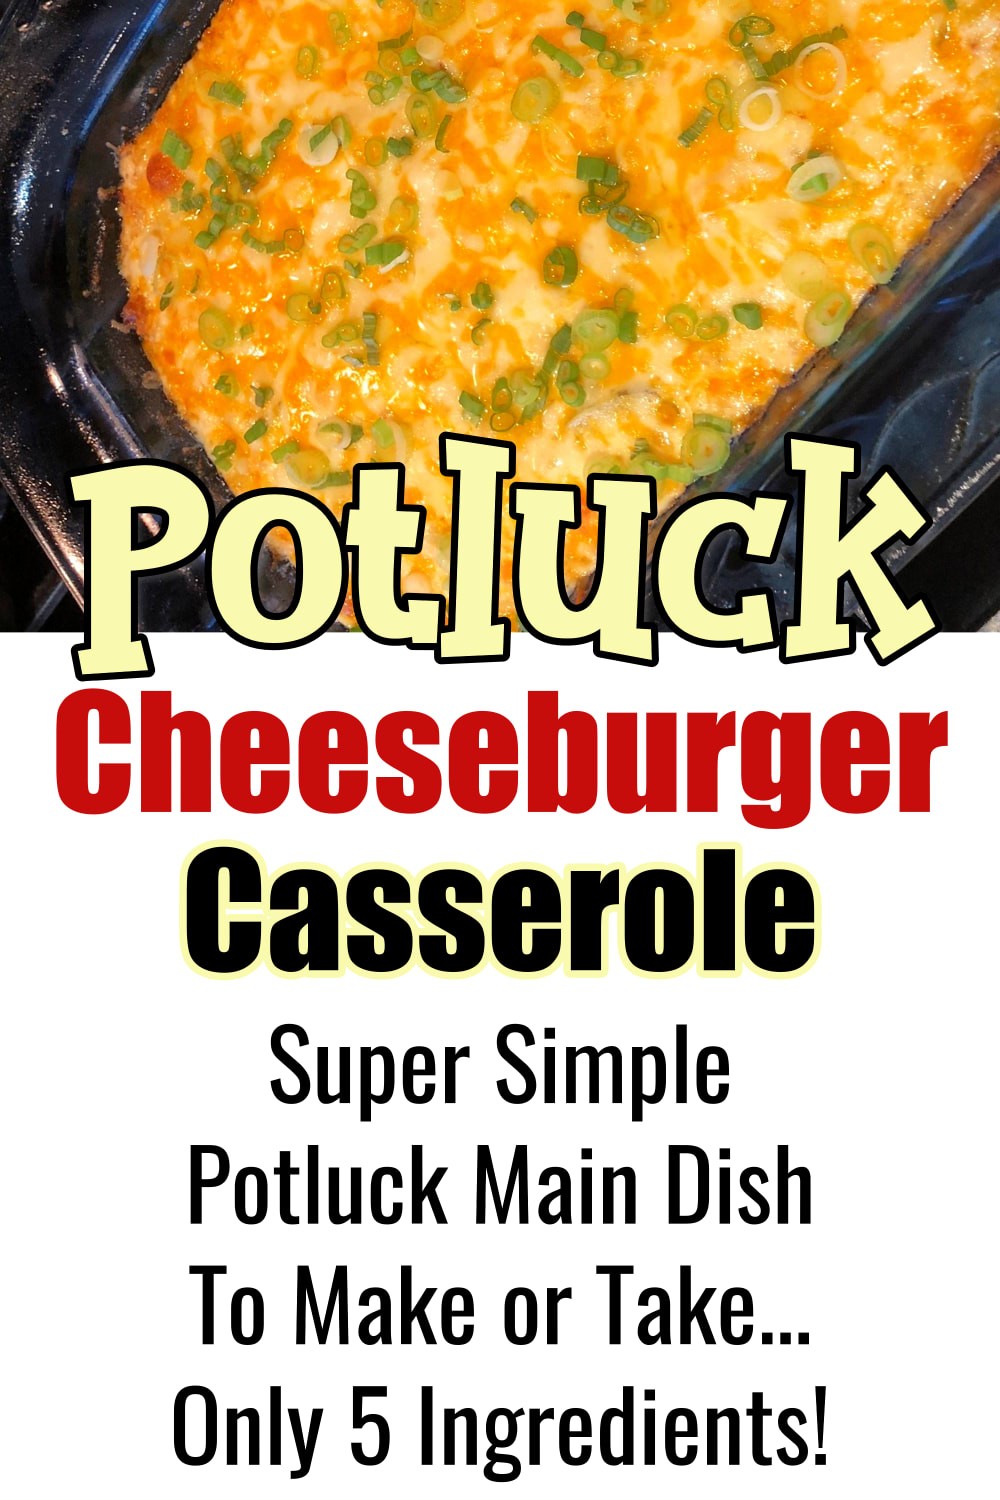 Potluck main dishes ideas for a crowd - Cheeseburger Potluck Casserole - make ahead or last minute - only 5 ingredients